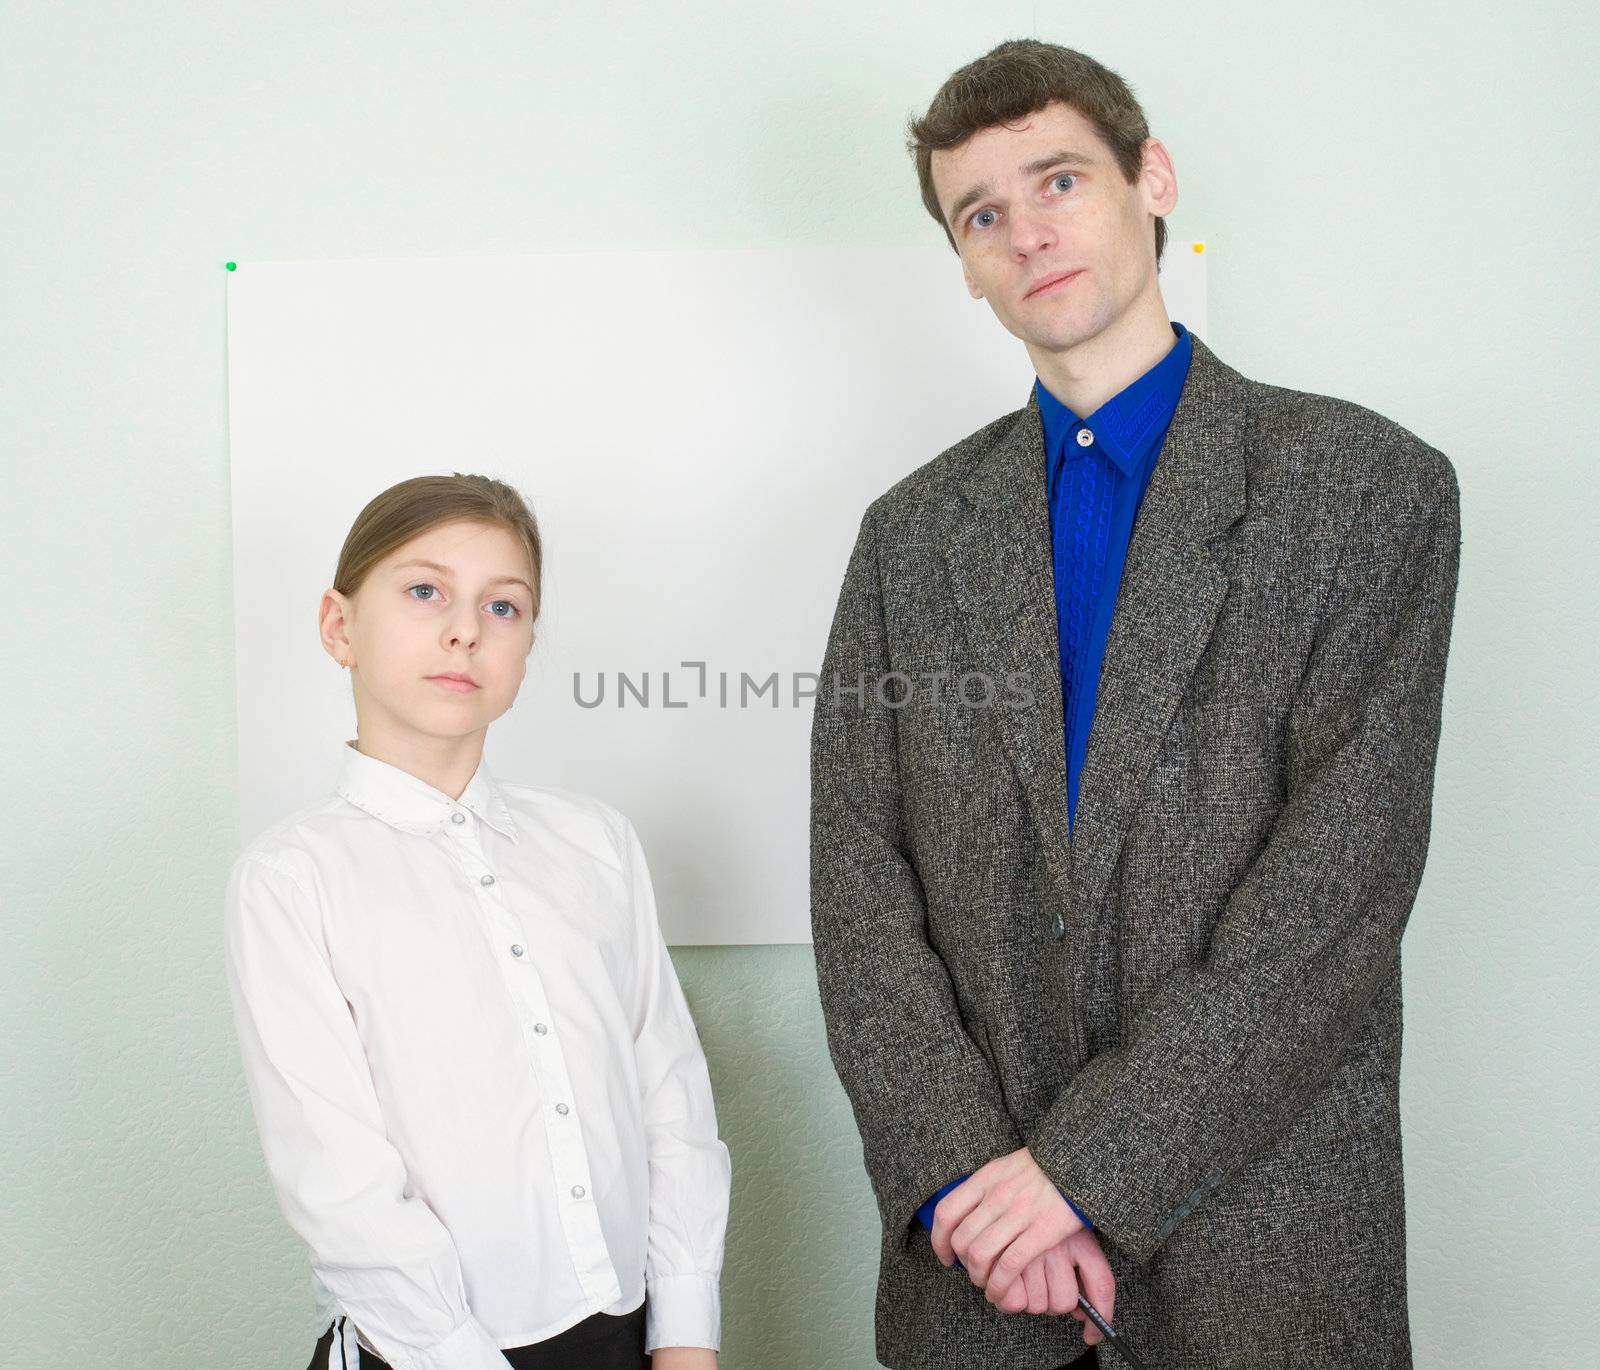 The little girl and the man in a suit